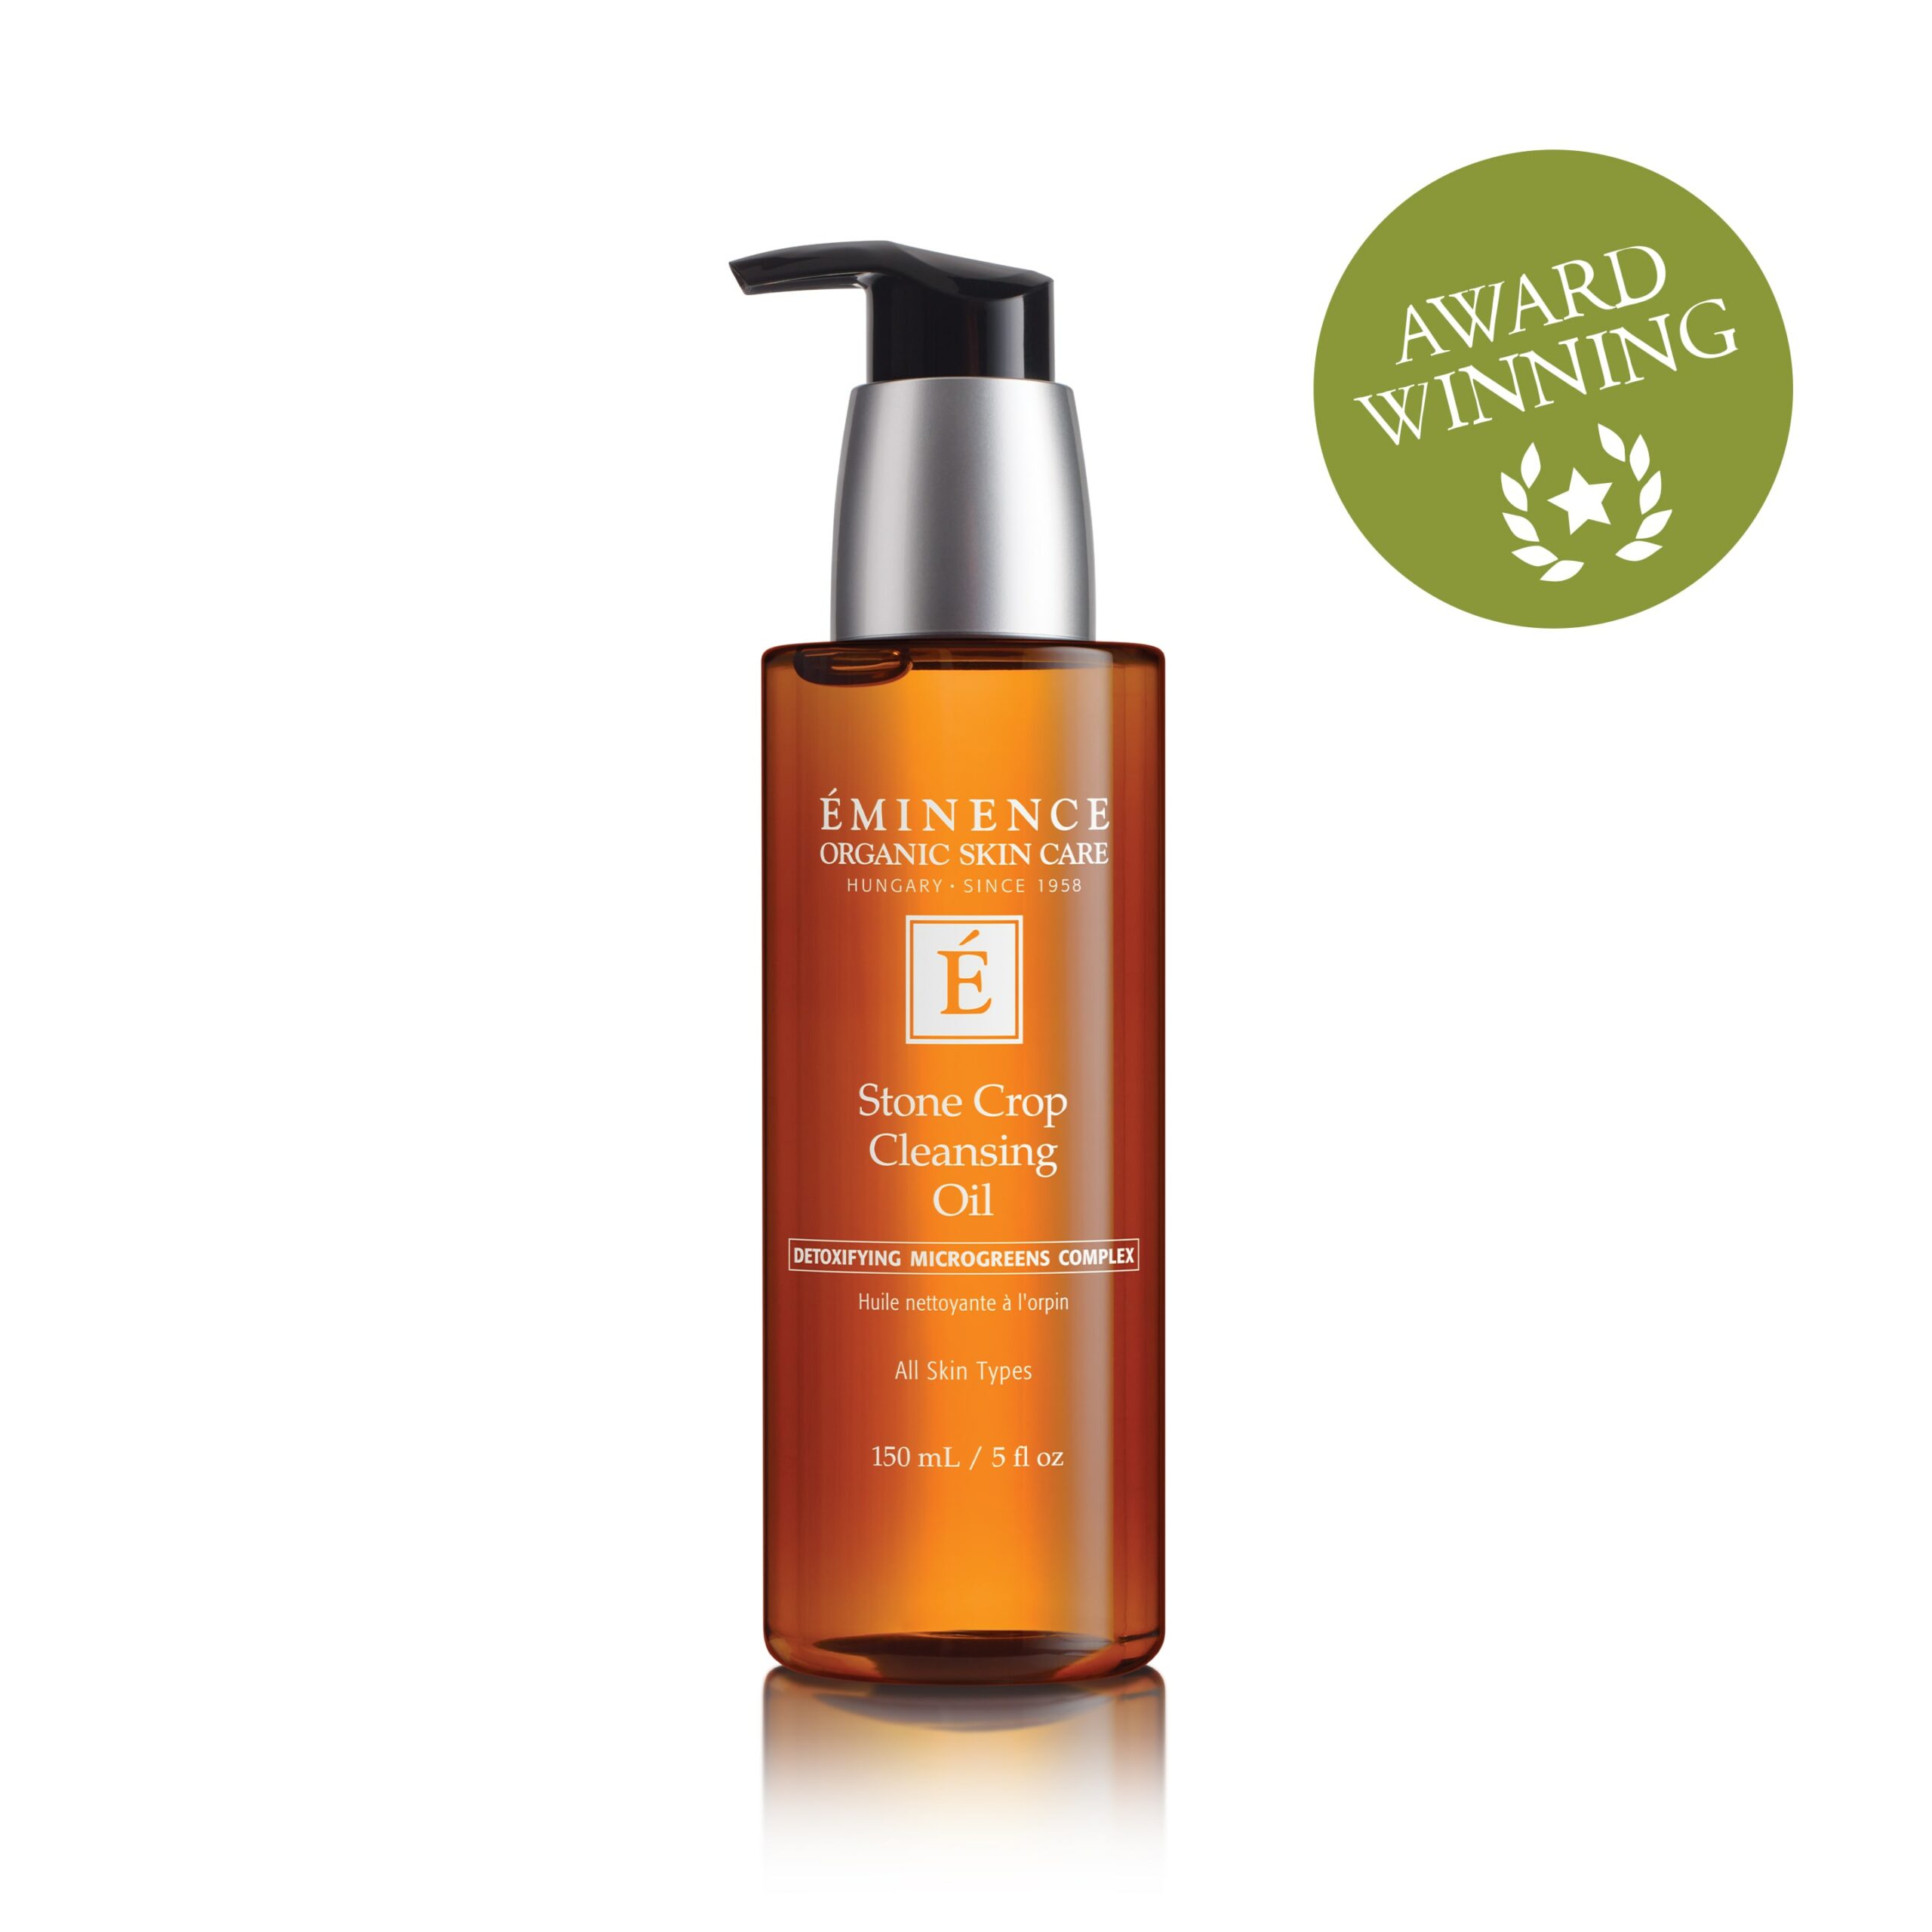 Eminence-Organics-Stone-Crop-Cleansing-Oil-SQ-AW